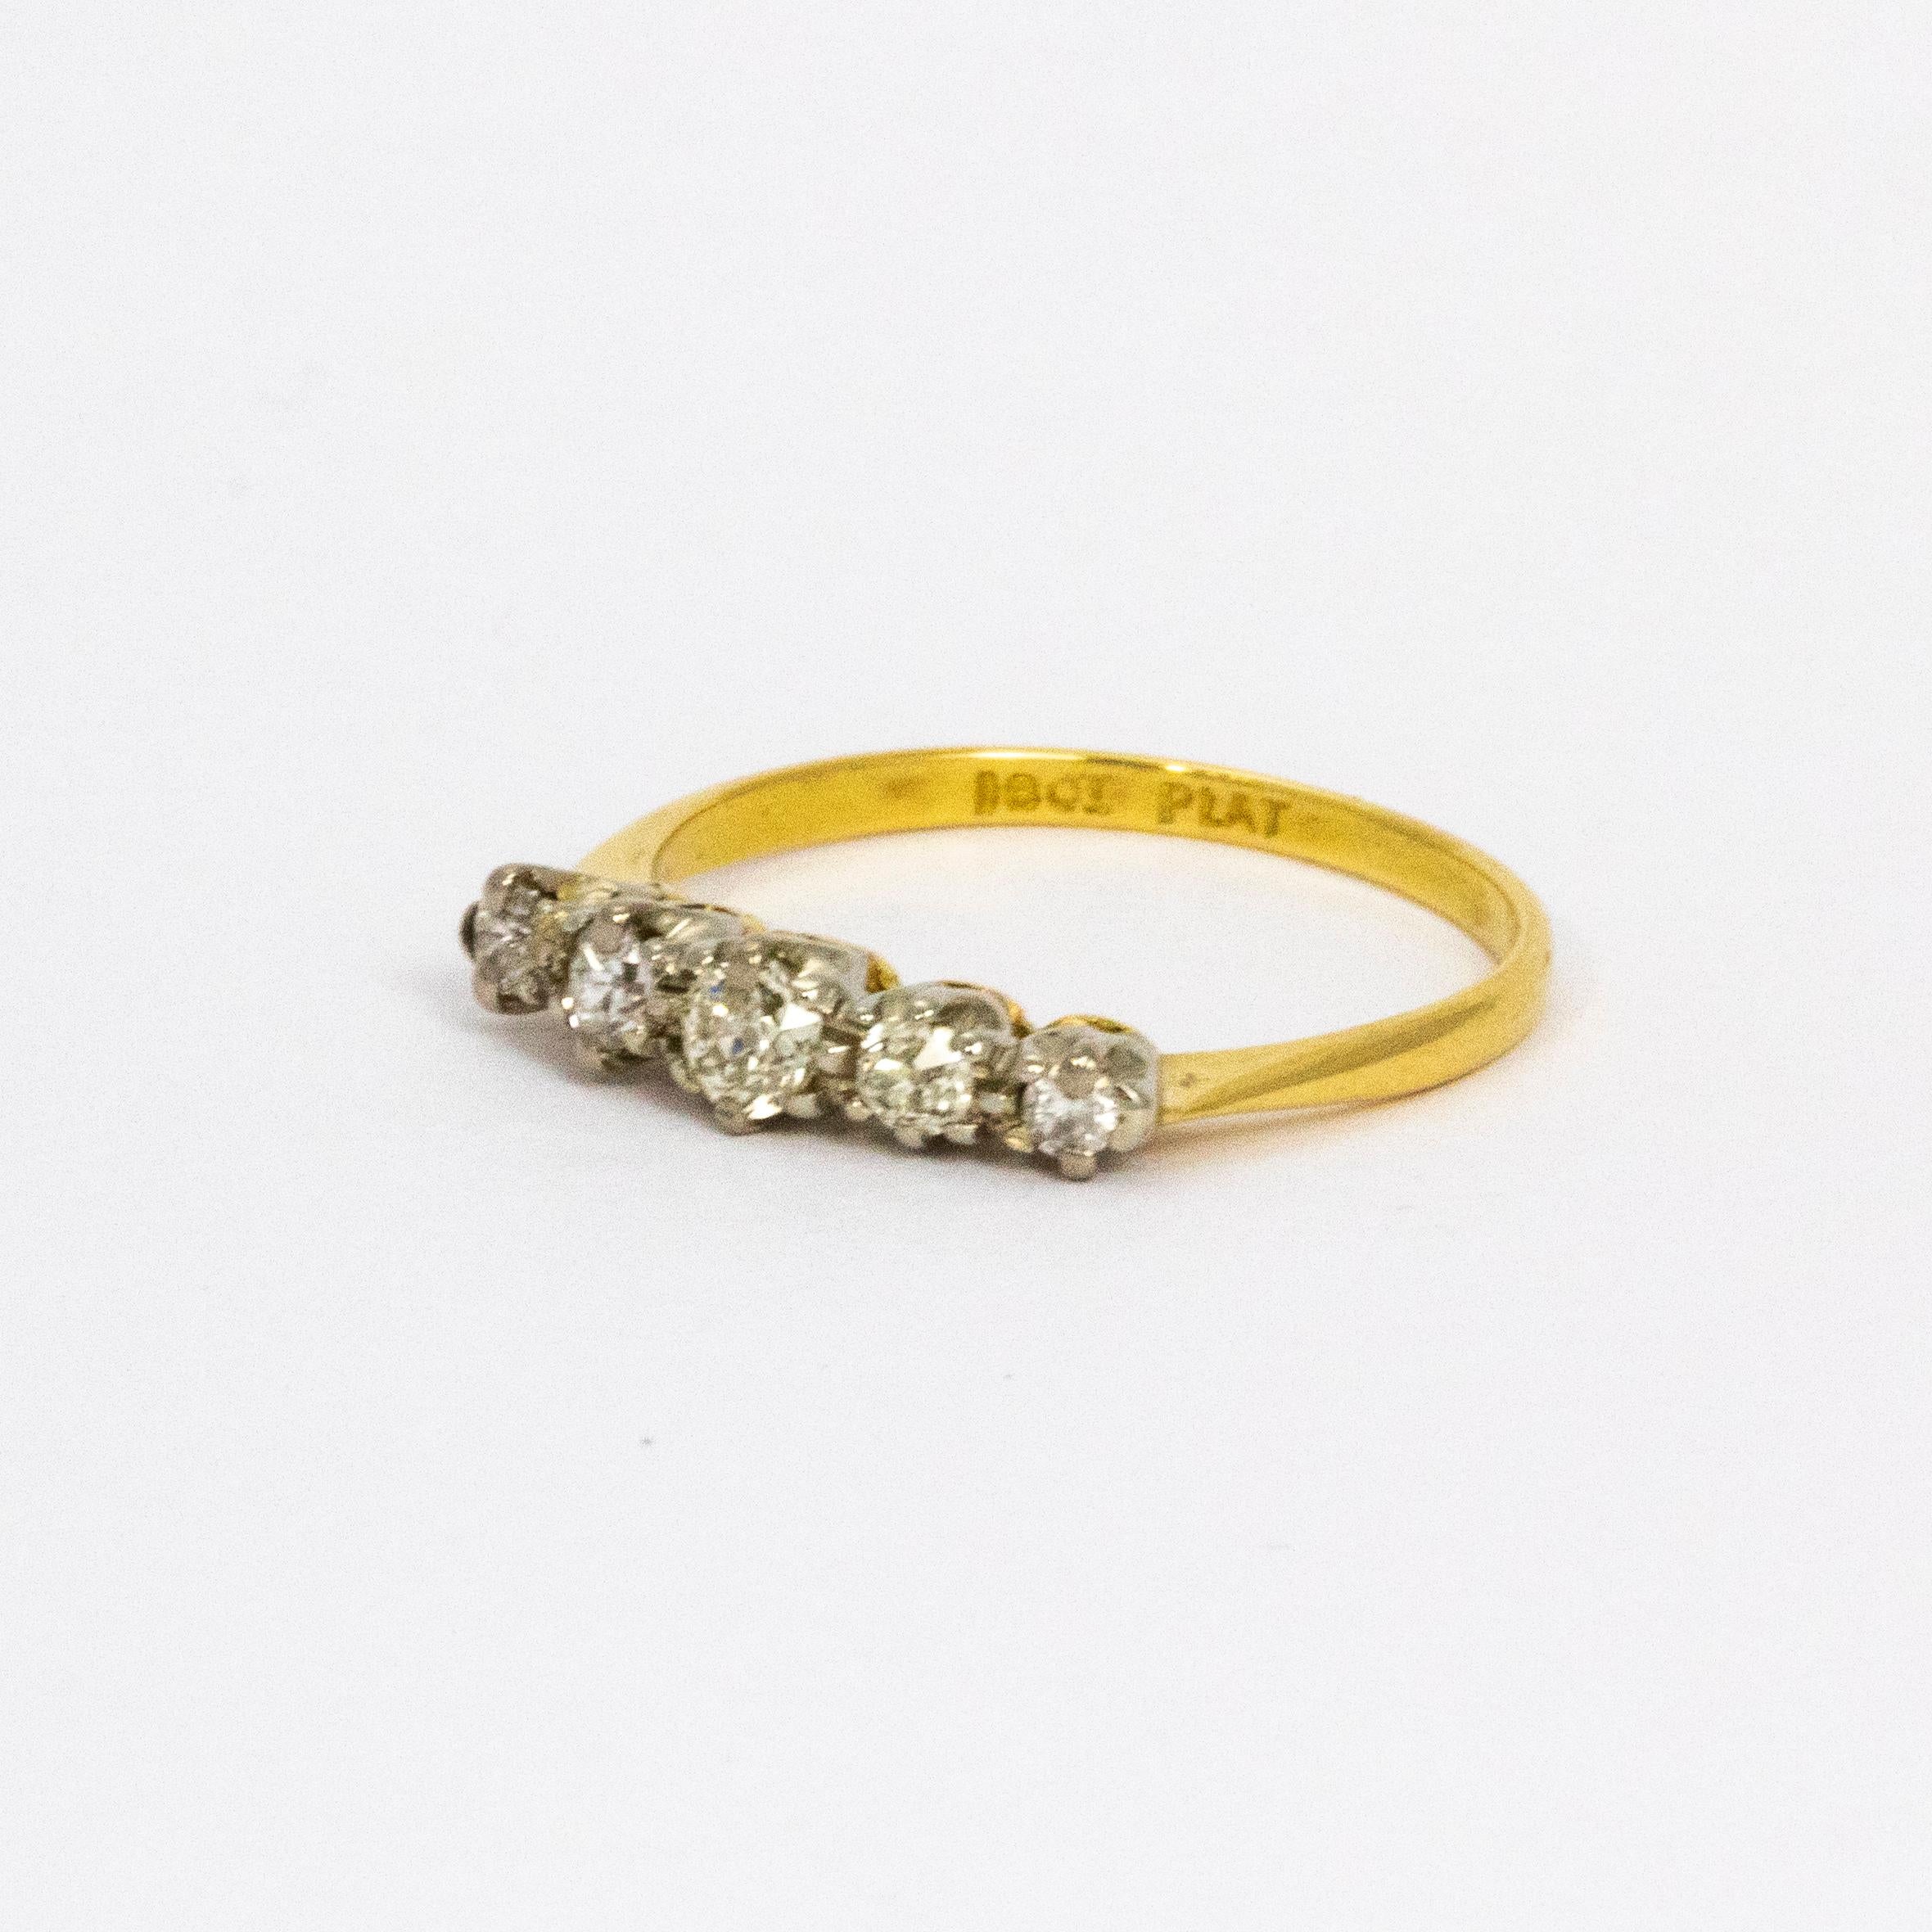 Classic graduated five stone diamond ring modelled in 18ct gold. diamond total approx 40pts. 

Ring Size: M or 6
Width: 3.5mm

Weight: 1.9g